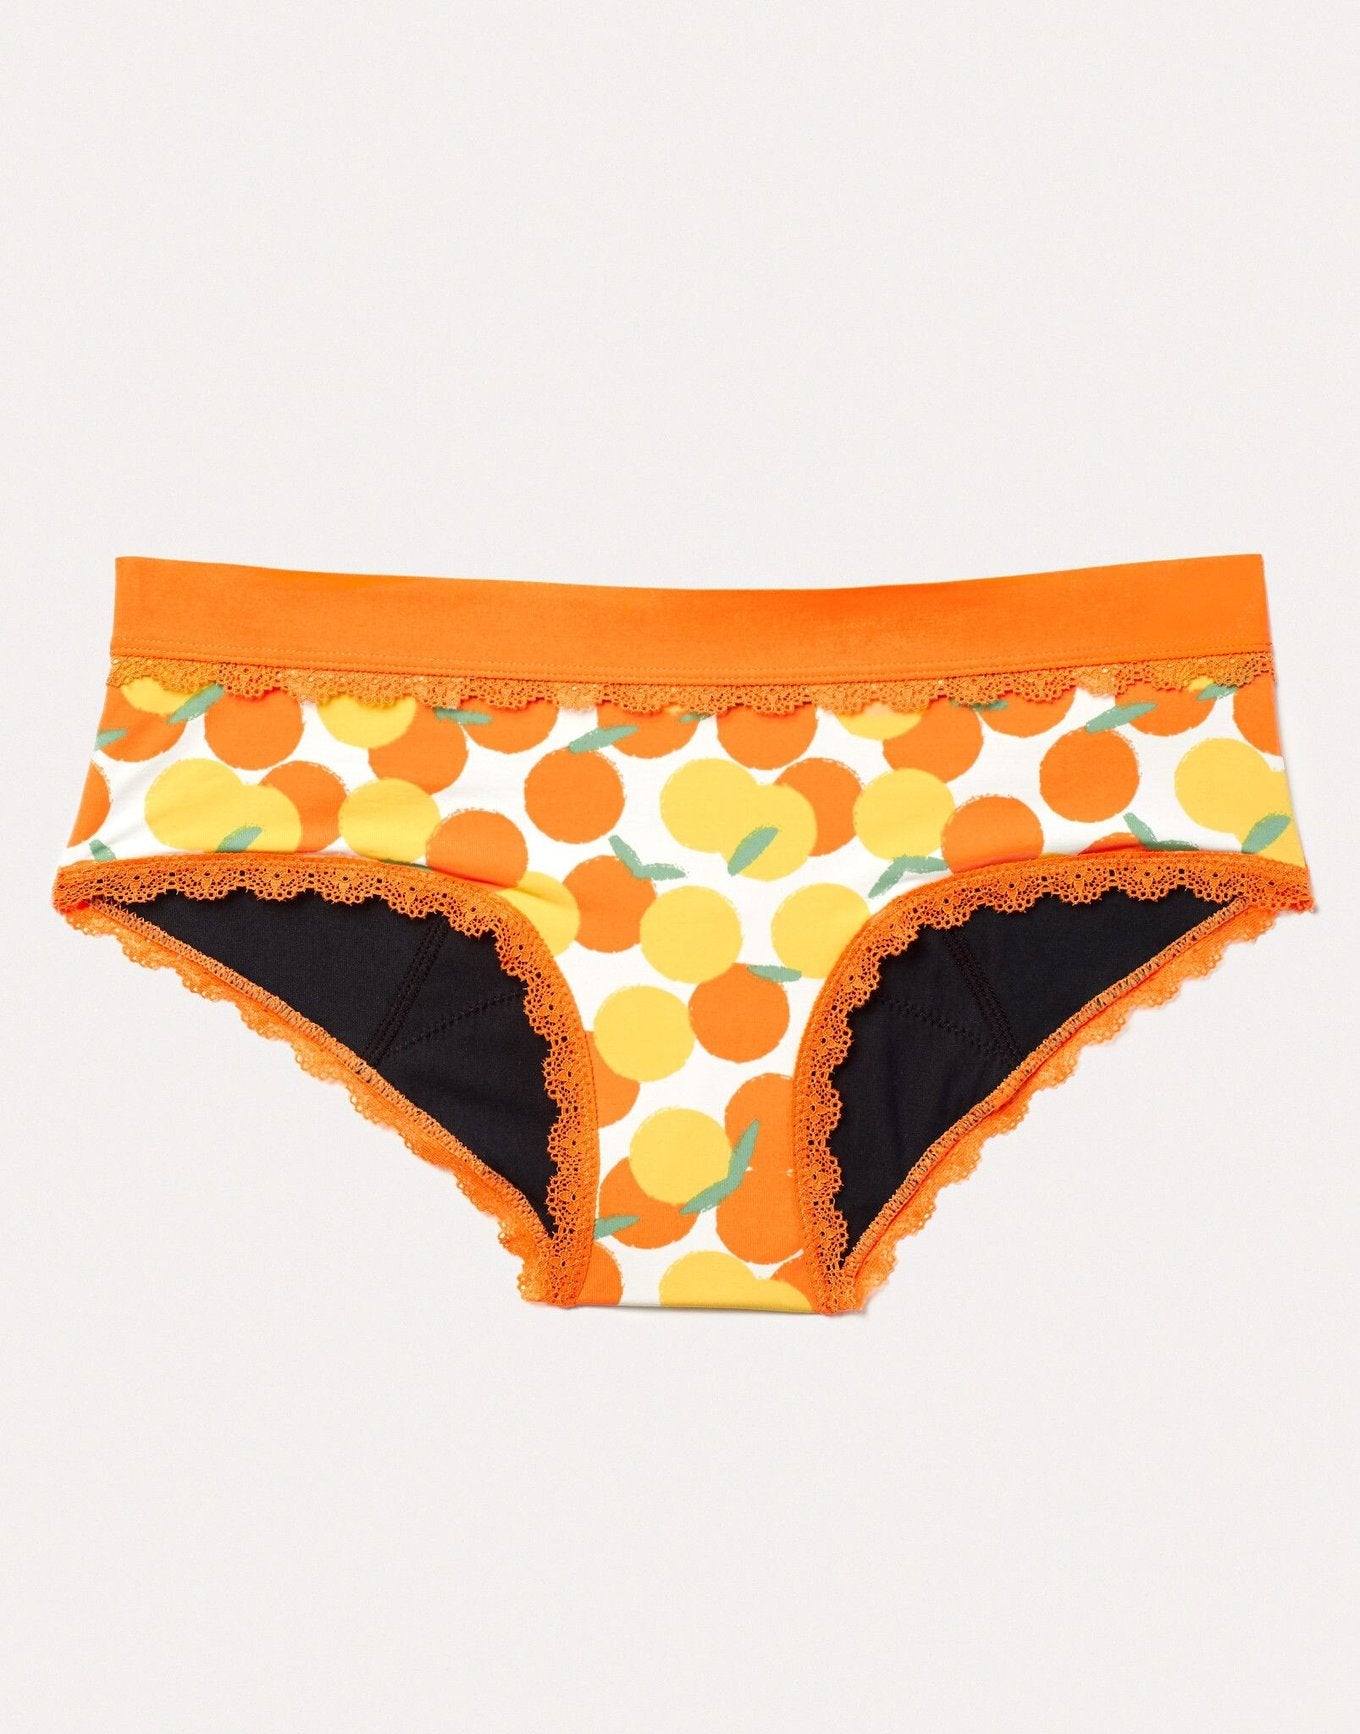 Joyja Olivia period-proof panty in color Zest of Life and shape hipster